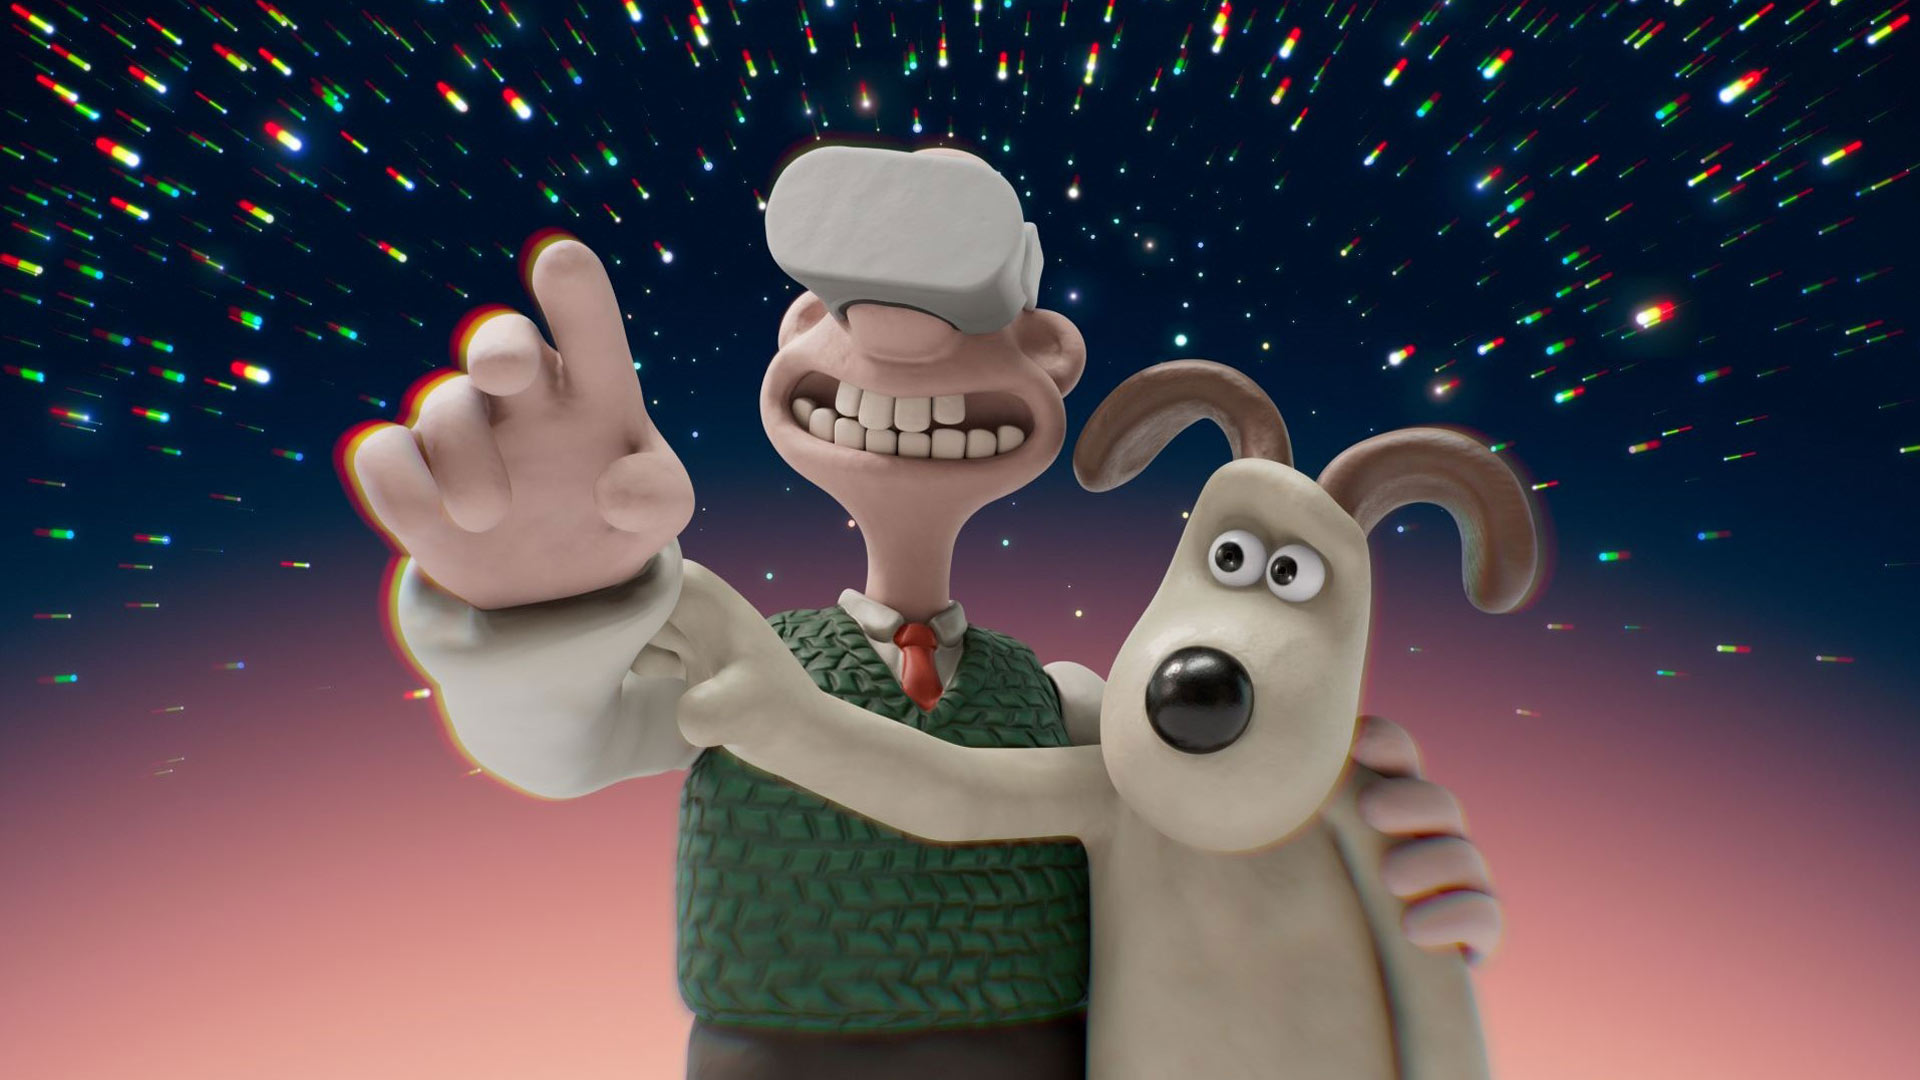 Wallace & Gromit is Coming to Quest 2 in ‘Grand Getaway’ Interactive VR Experience